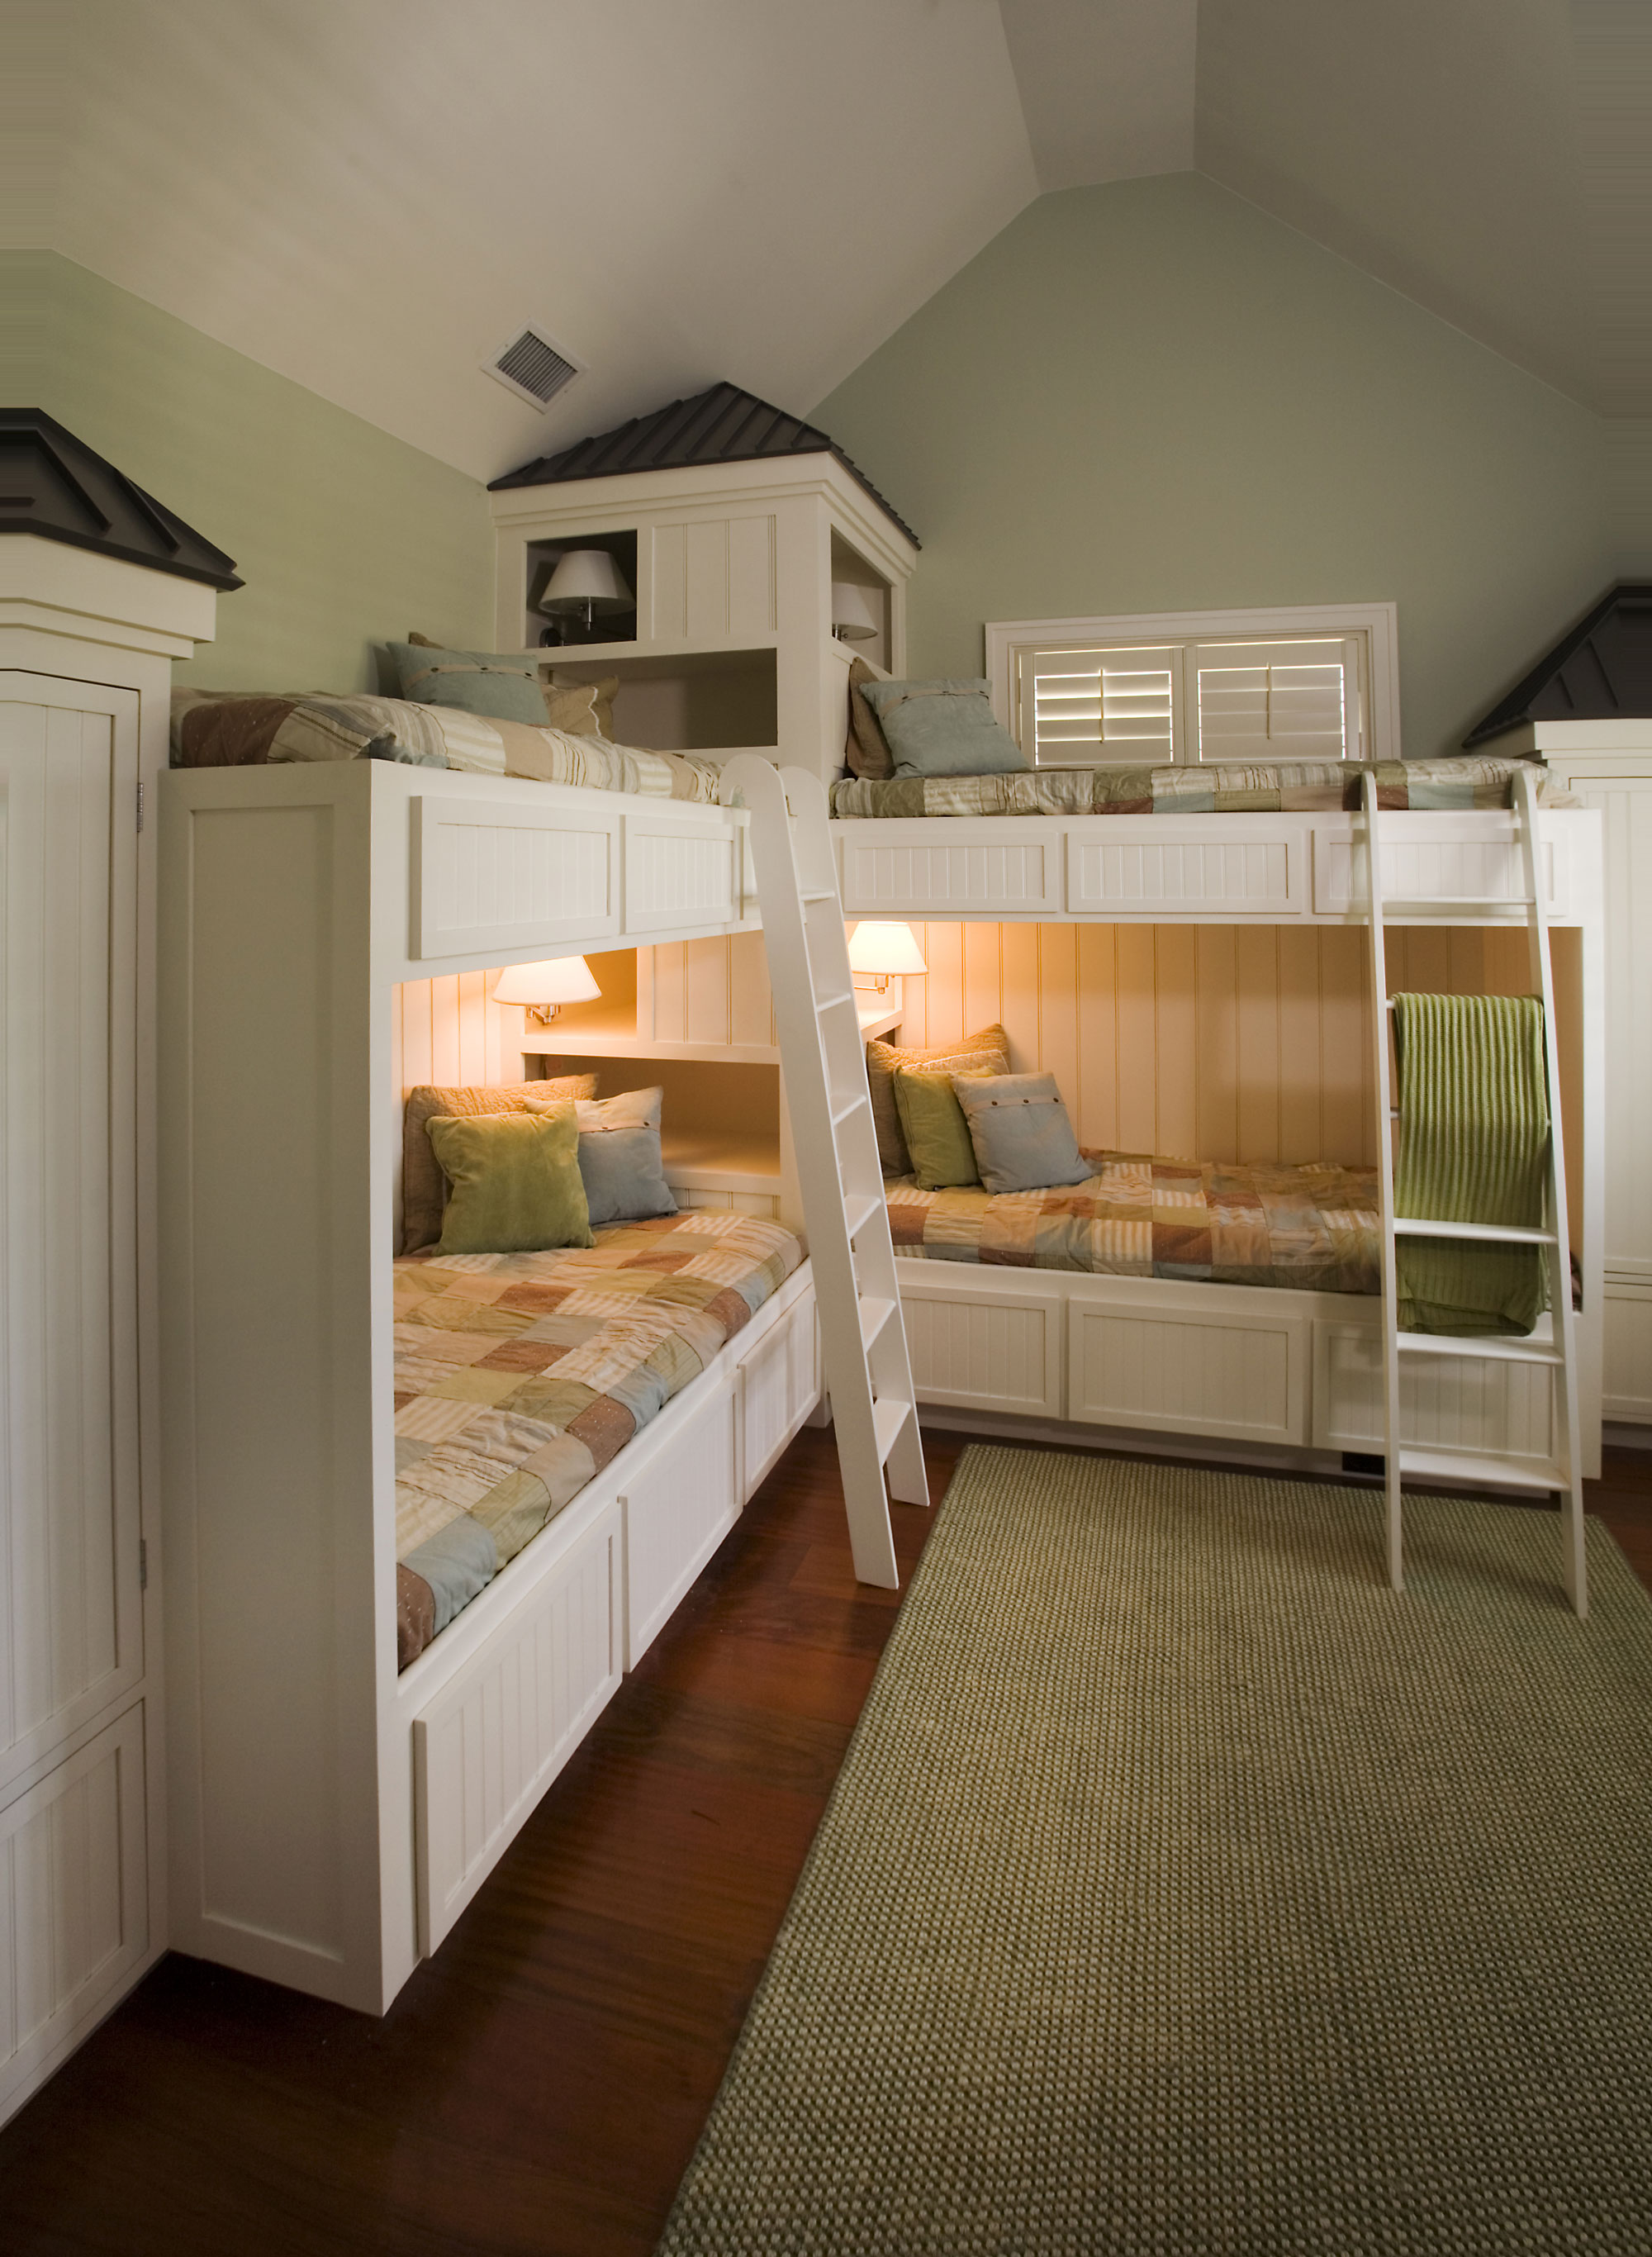 Bunk room, nautical style in beach house